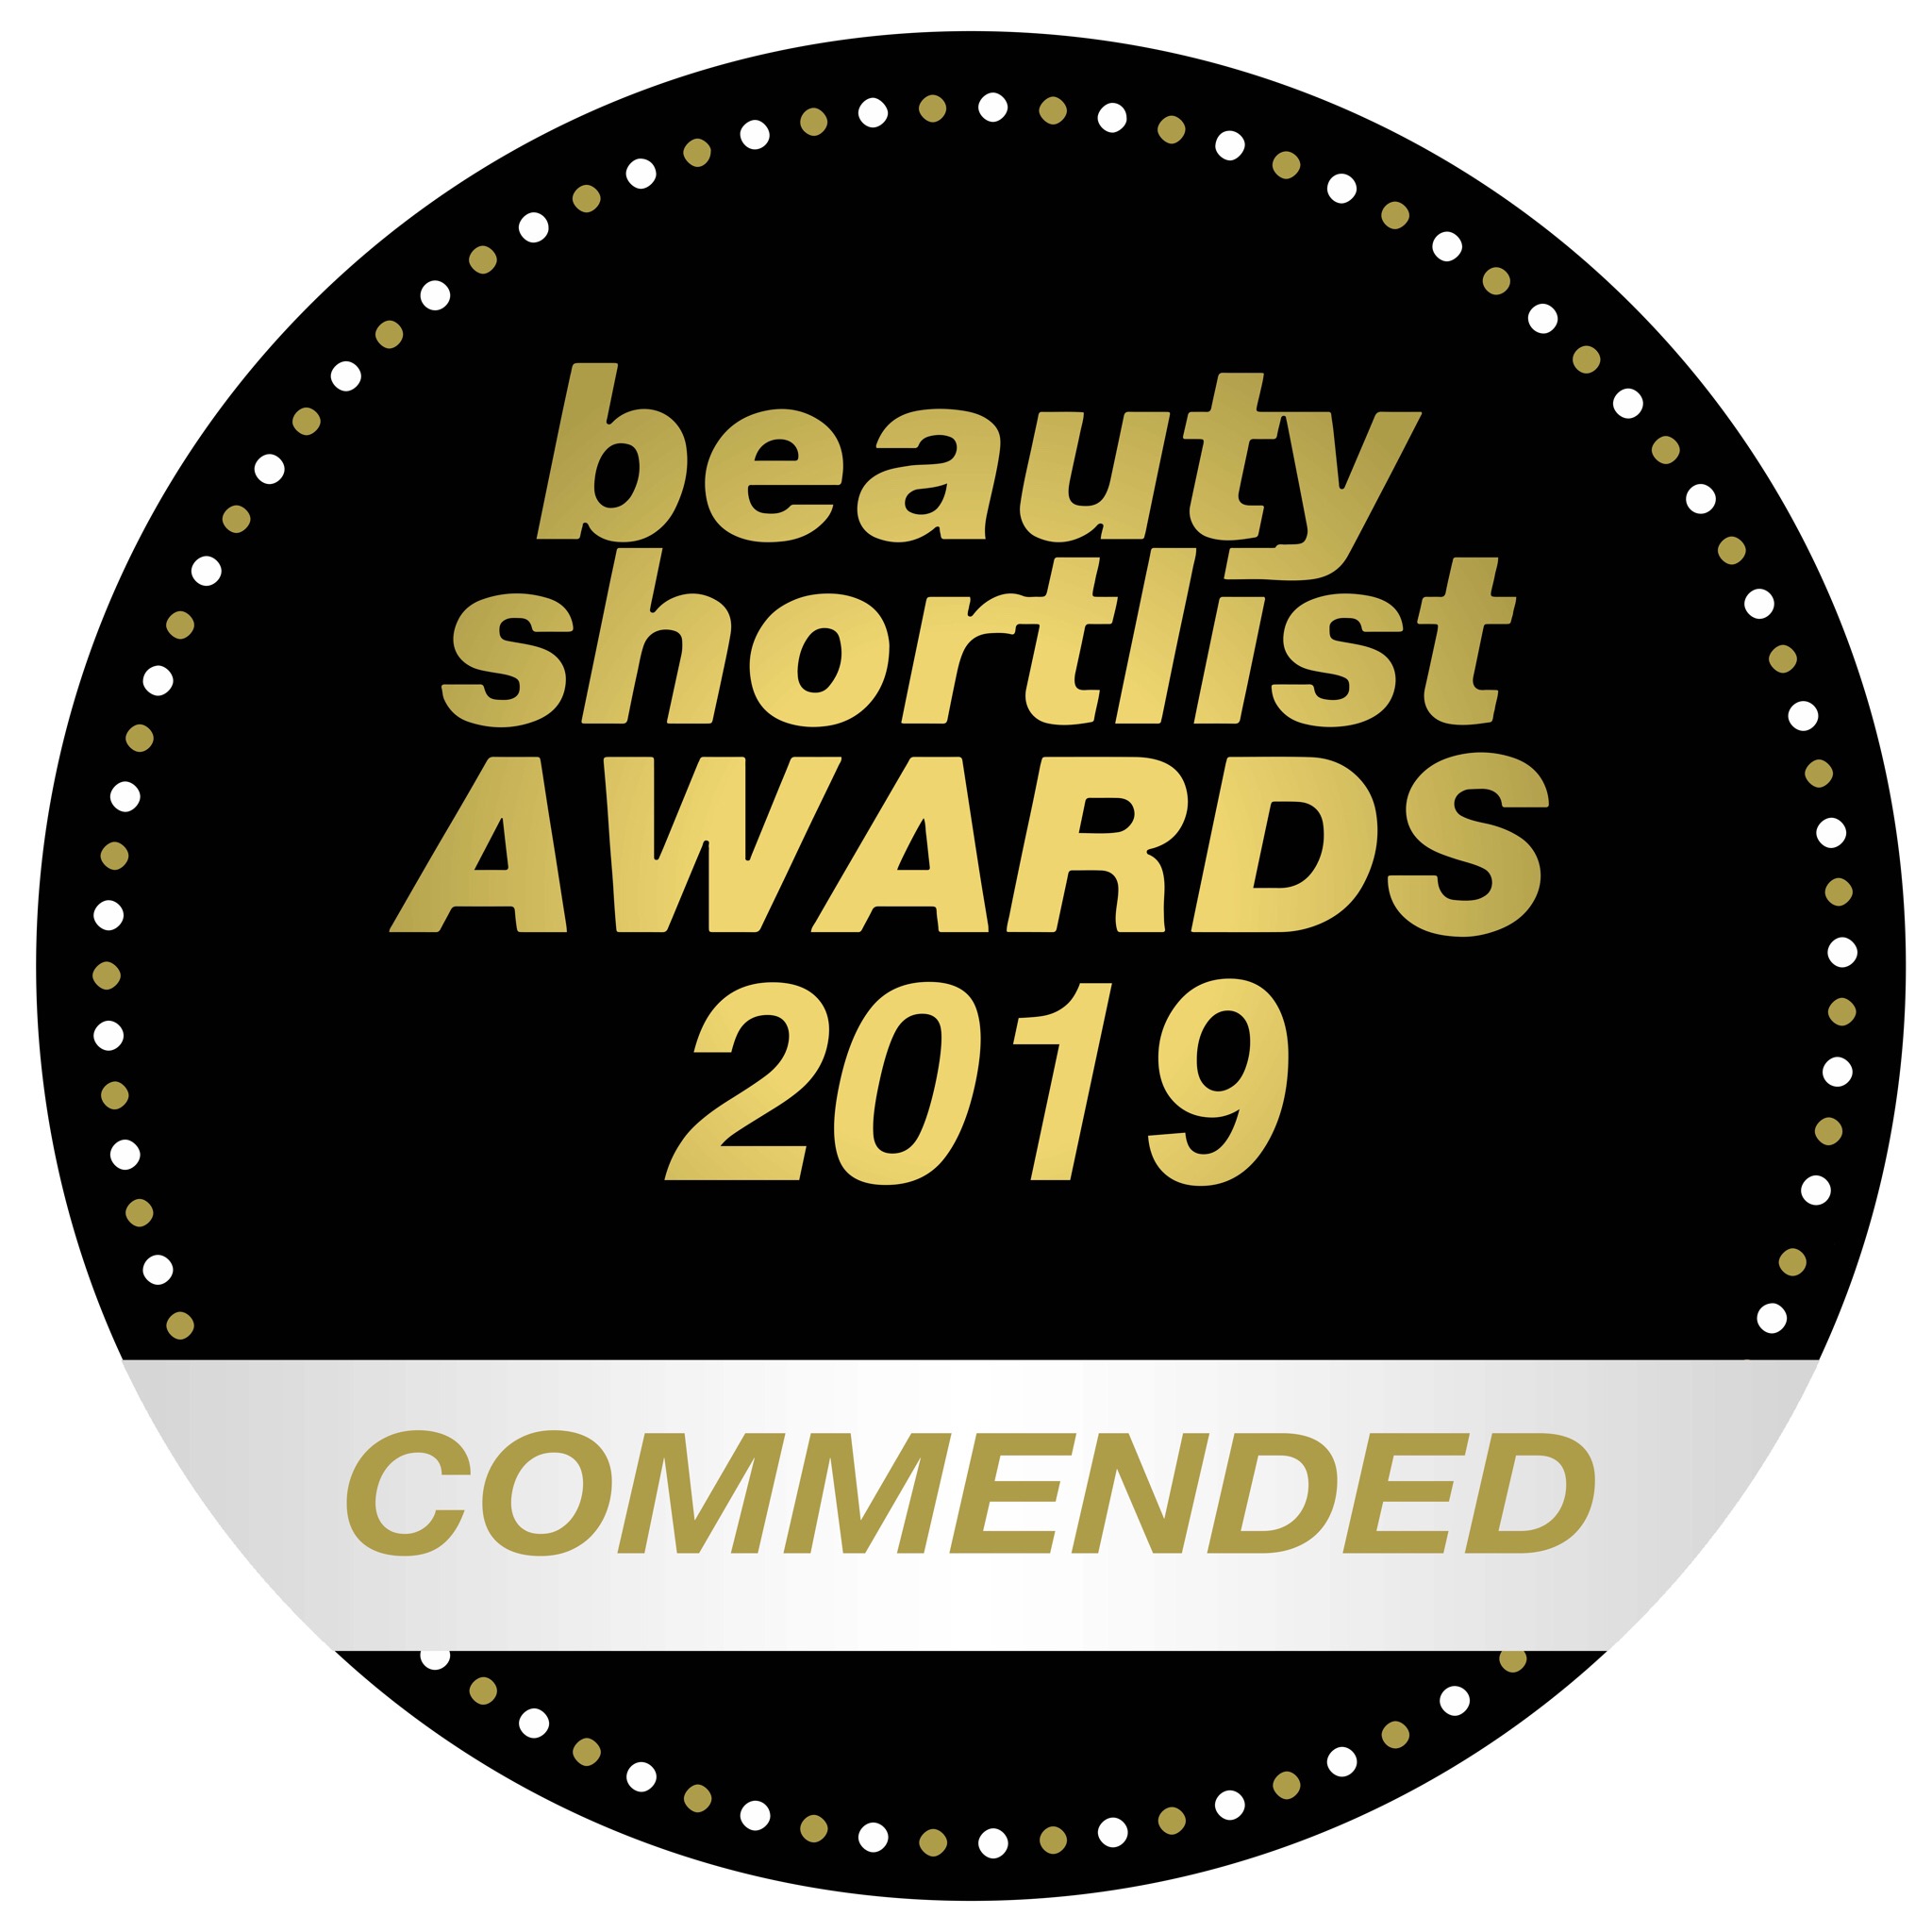 The Beauty Shortlist Awards Commended